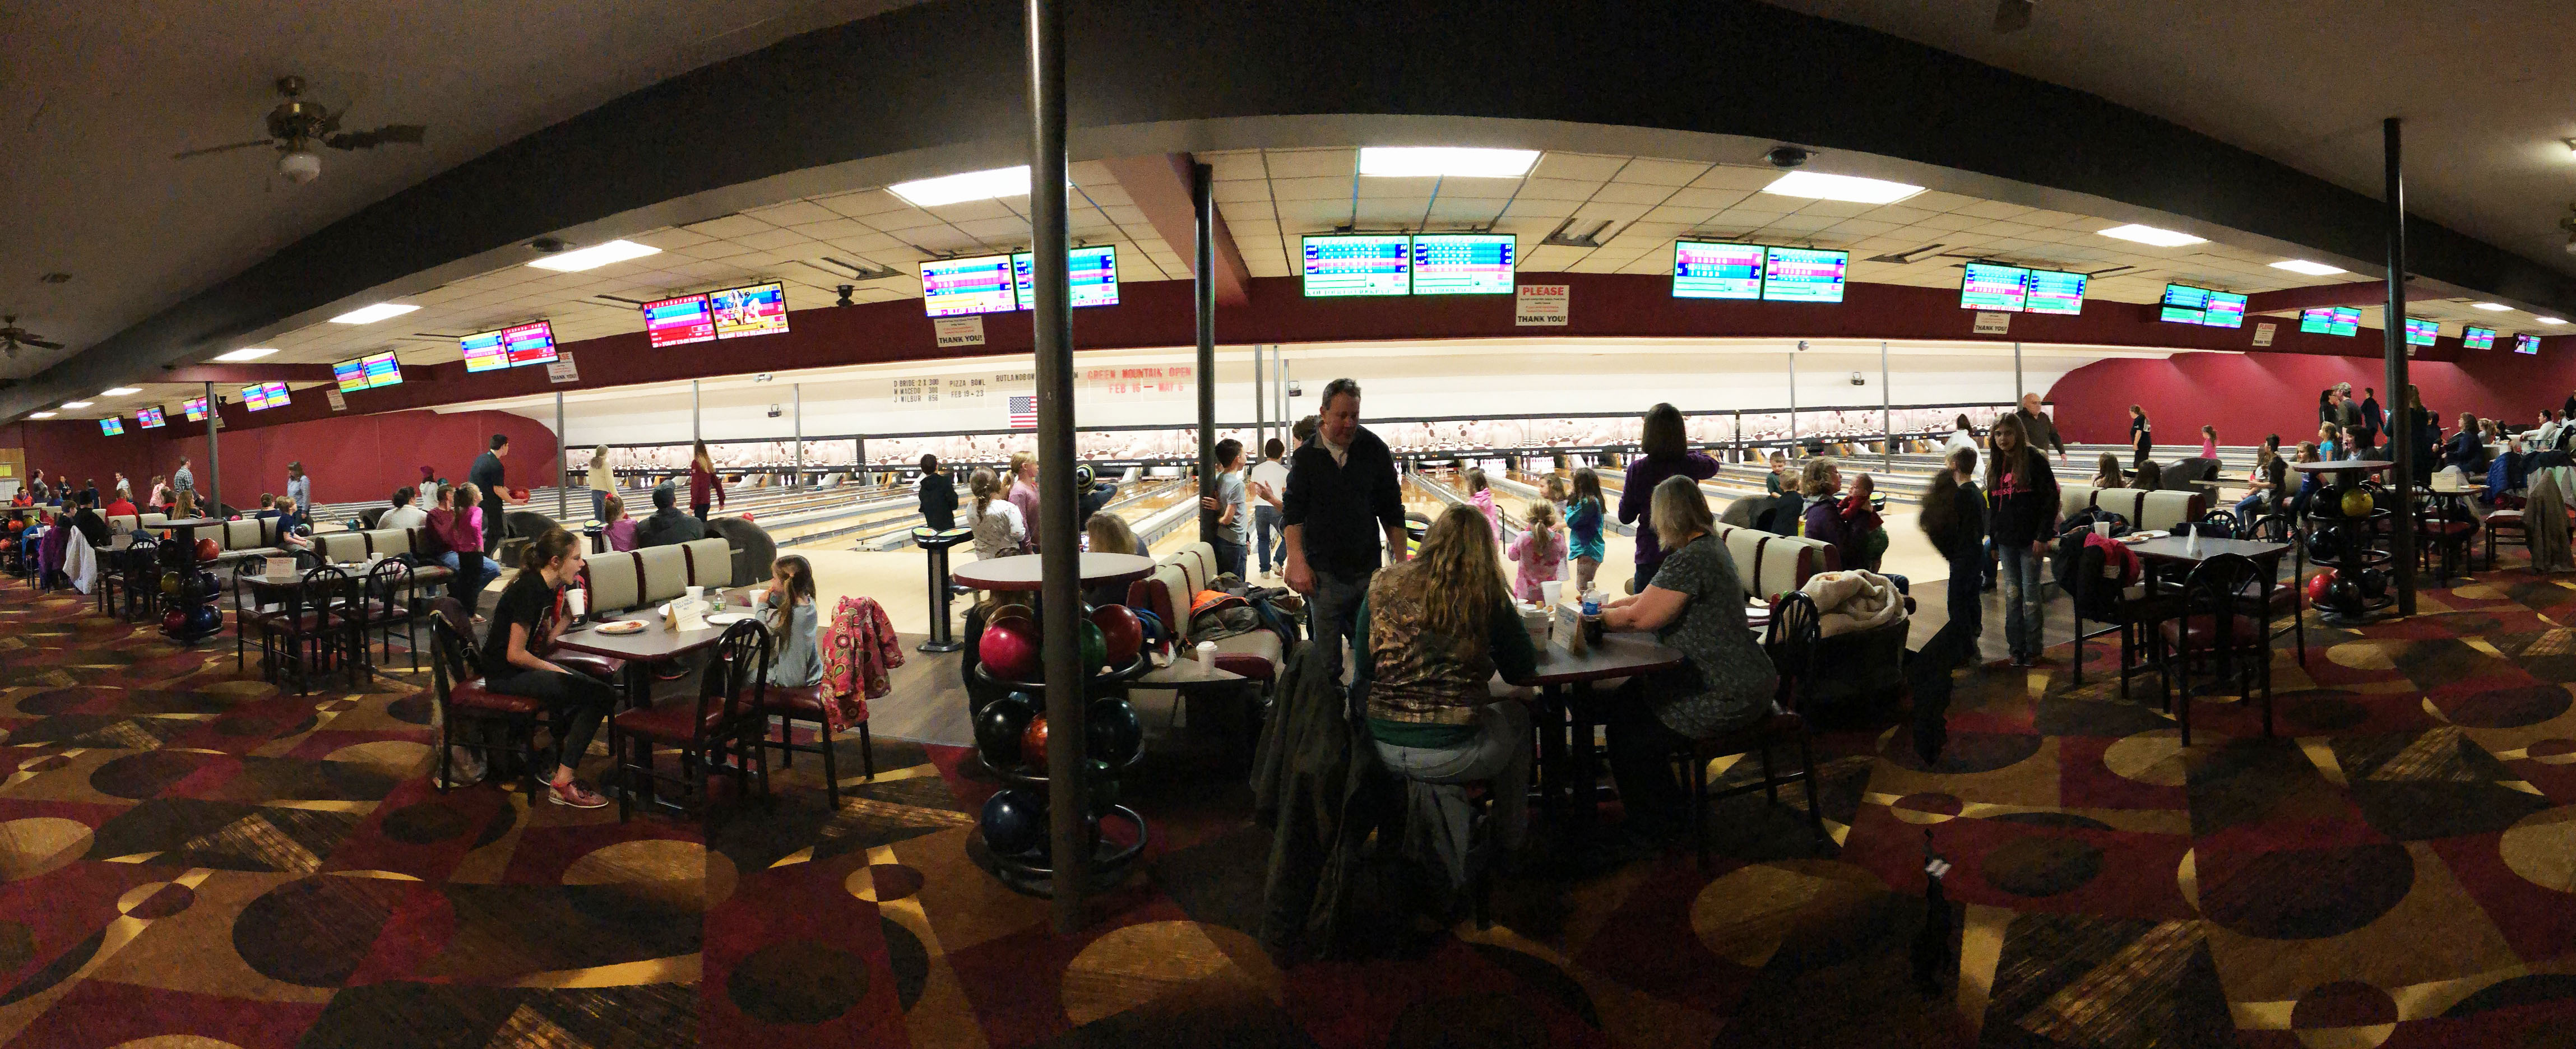 Hold Your Next Party or Event at Rutland Bowlerama